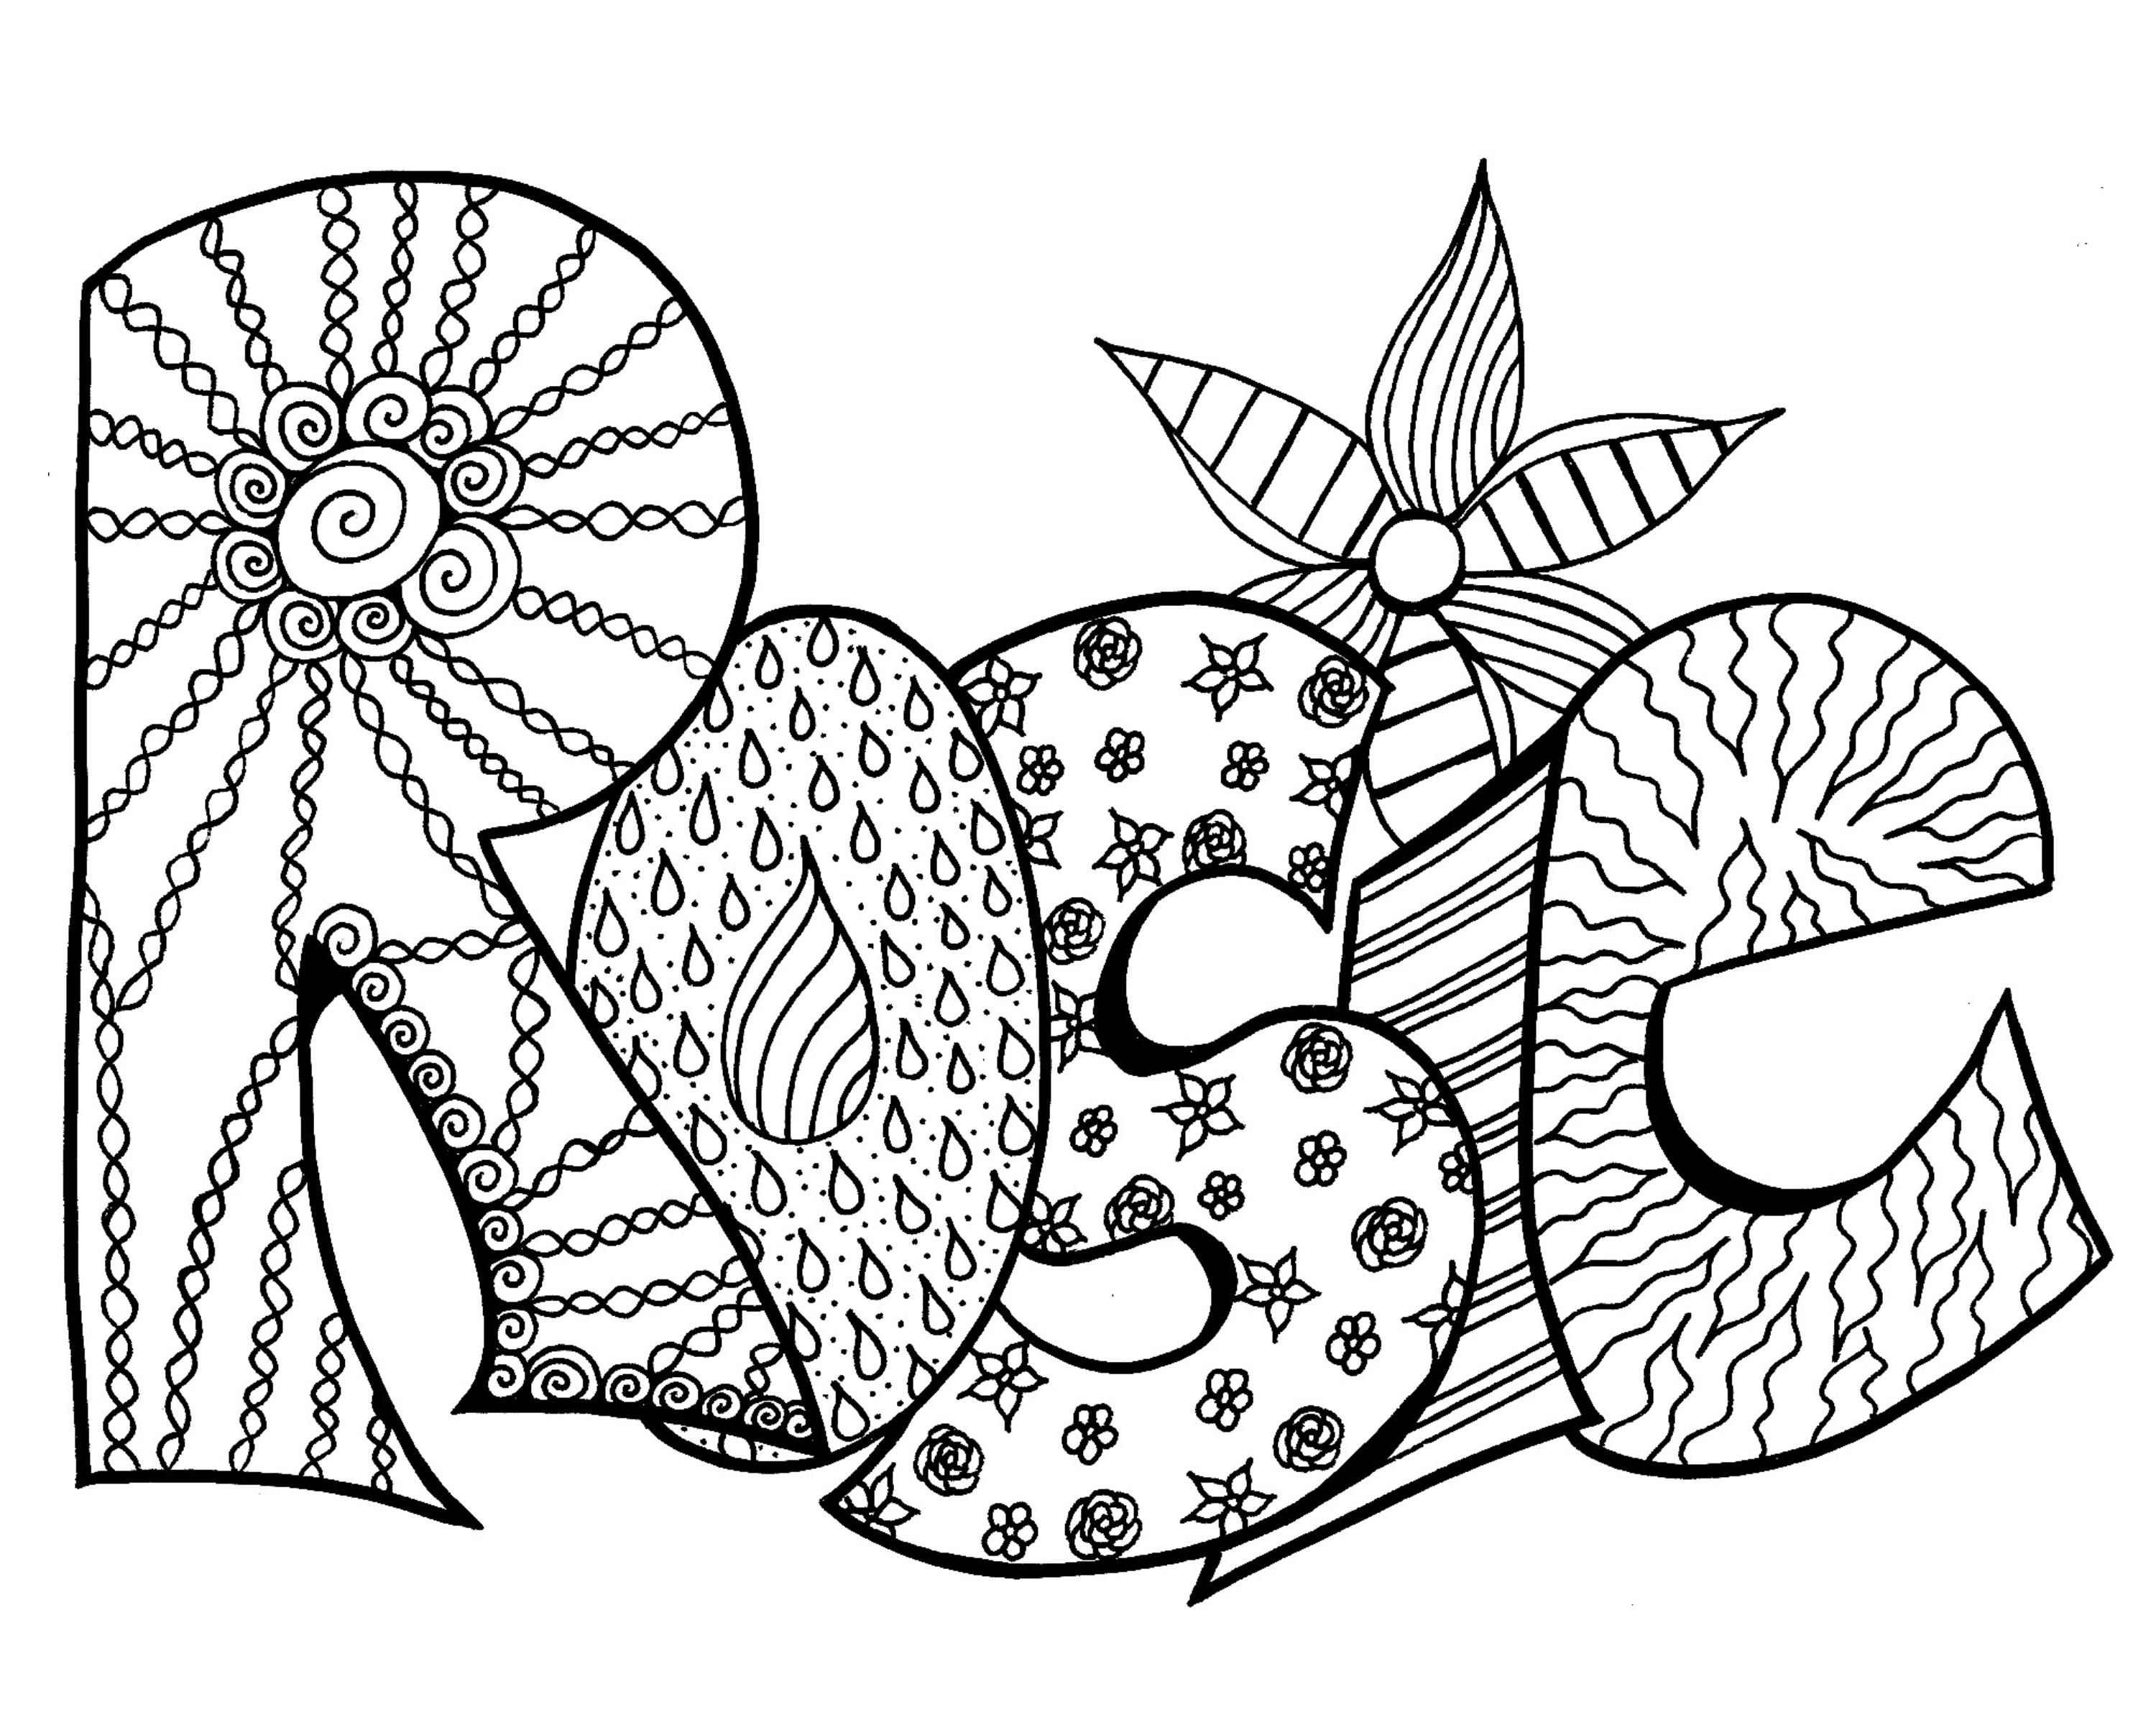 Coloring Pages That Says Your Name at